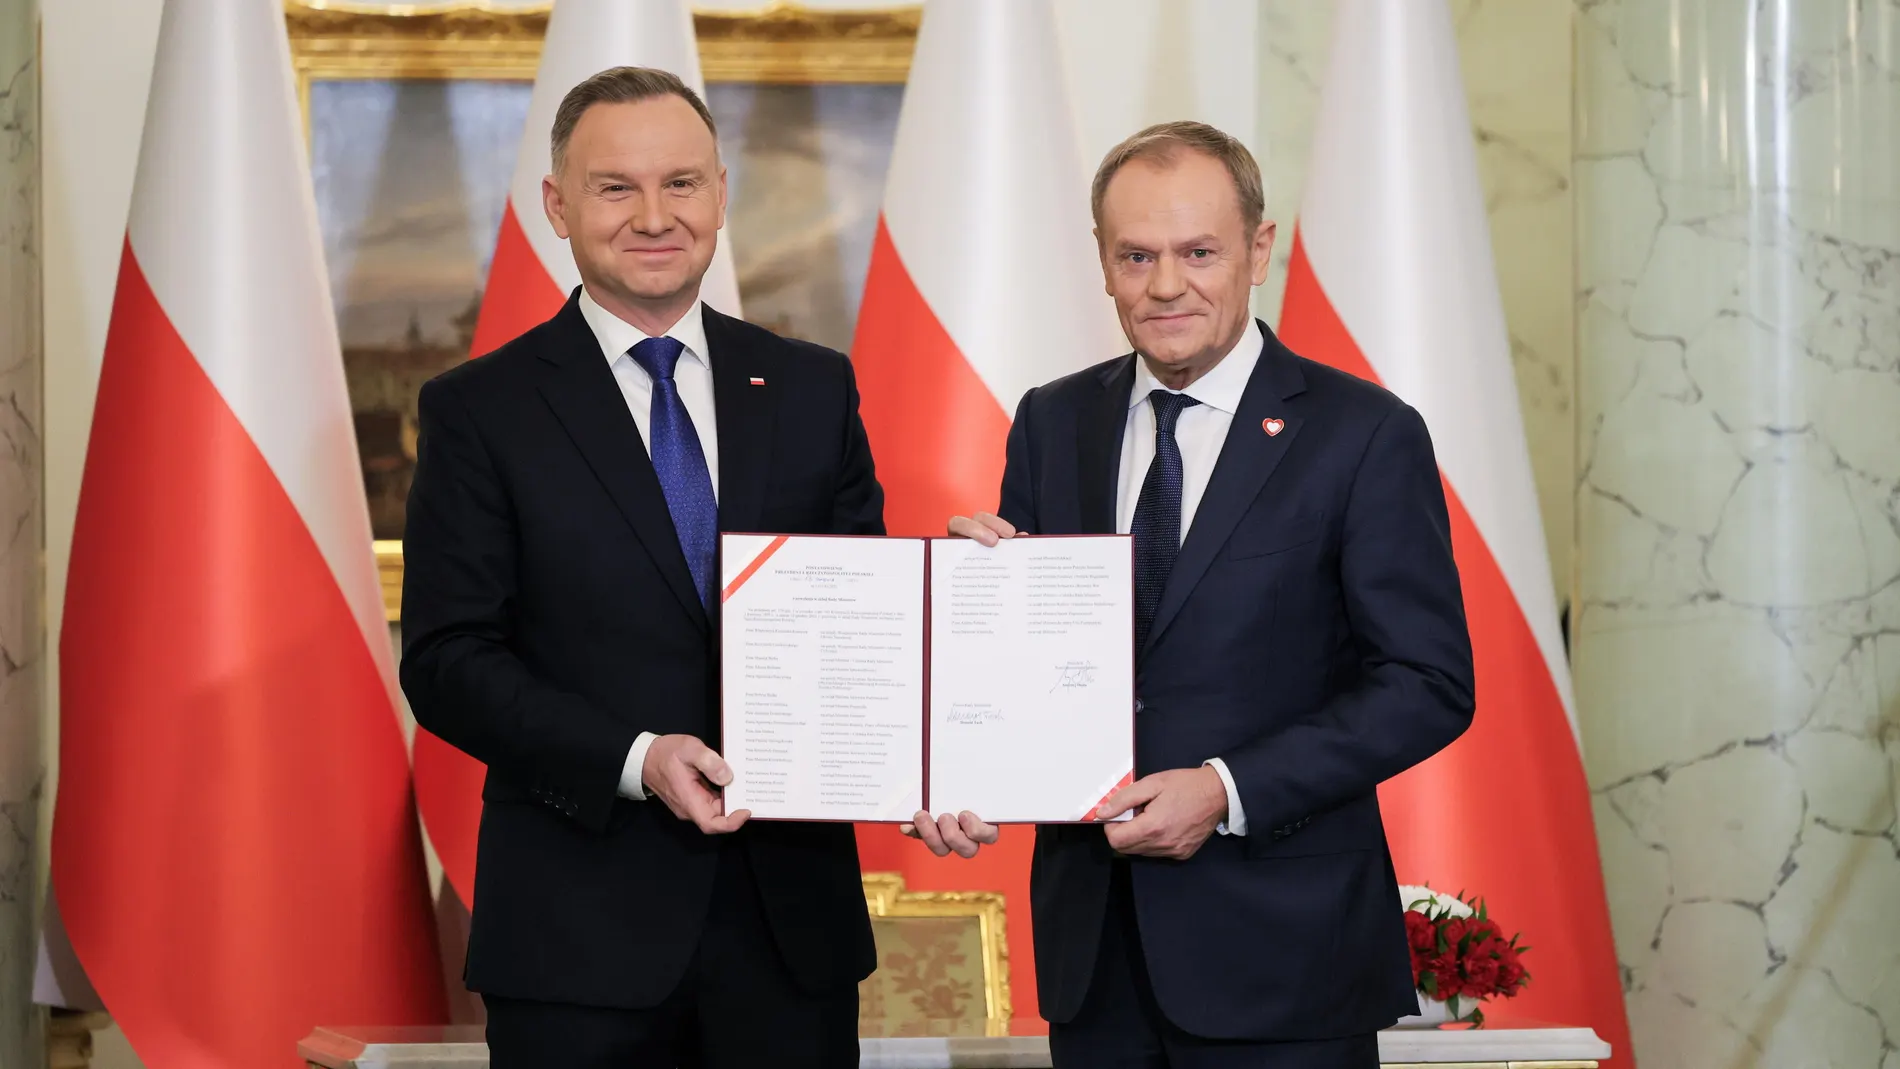 Warsaw (Poland), 13/12/2023.- Poland's President Andrzej Duda (L) appoints Donald Tusk (R) for Polish Prime Minister in the new government during a ceremony at the Presidential Palace in Warsaw, Poland, 13 December 2023. (Polonia, Varsovia) EFE/EPA/PAWEL SUPERNAK POLAND OUT